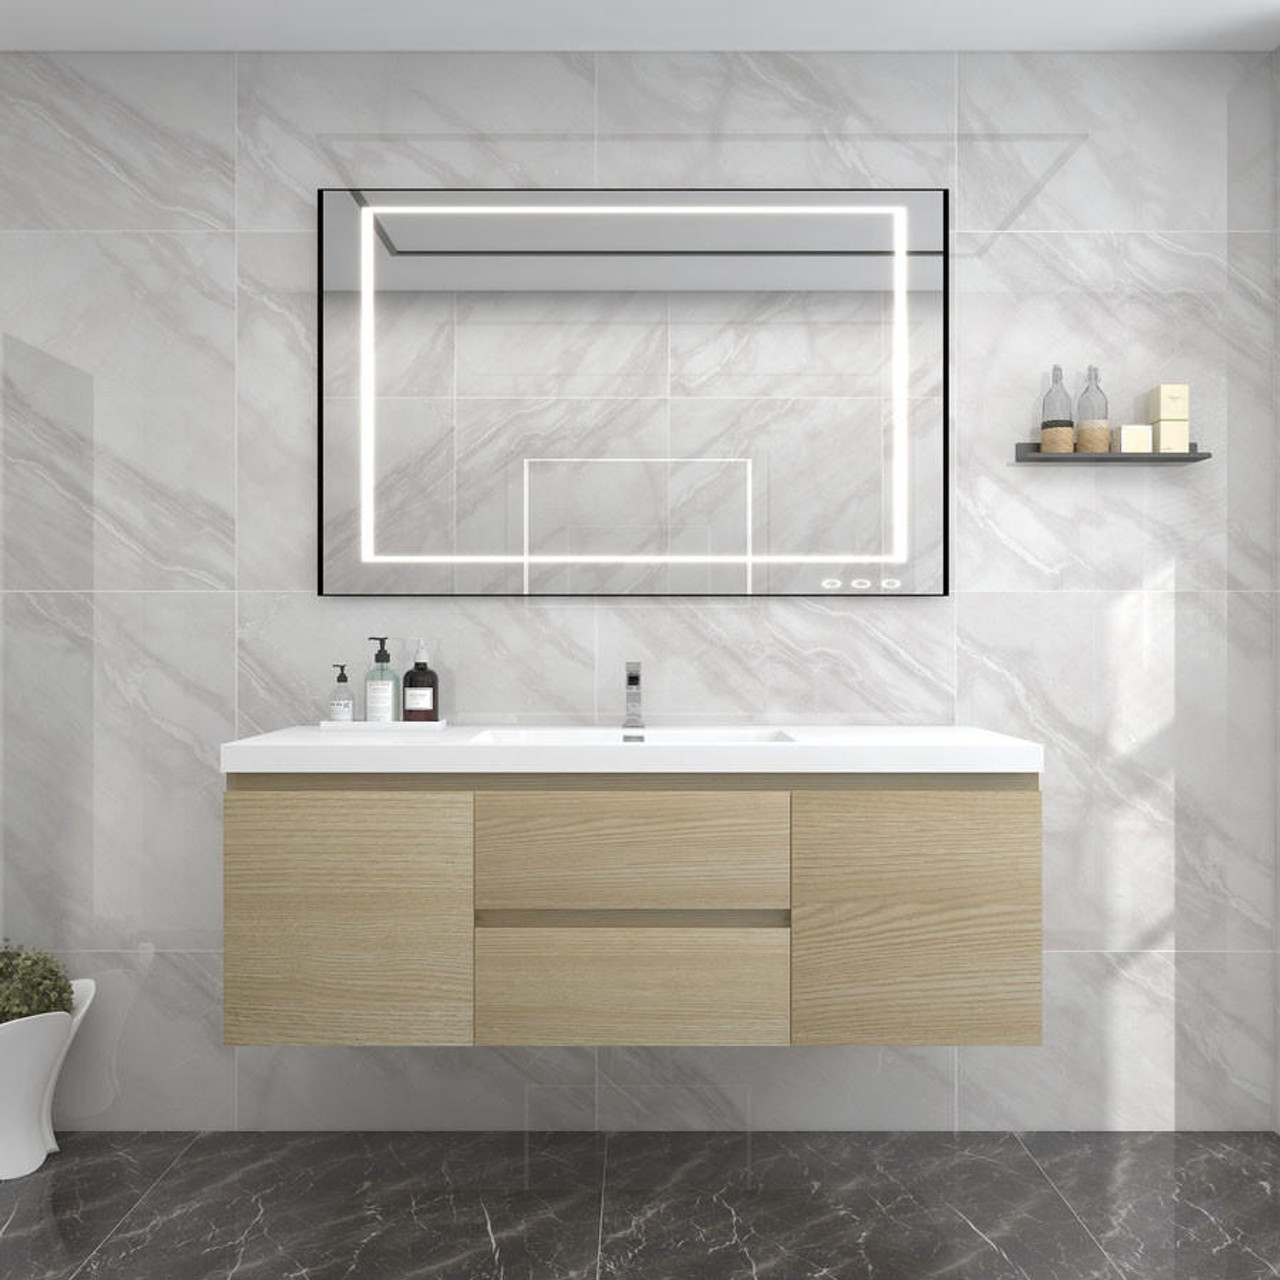 https://cdn11.bigcommerce.com/s-qgdlnuy6t7/images/stencil/1280x1280/products/1410/13076/bow-60-wall-mounted-bath-vanity-with-single-reinforced-acrylic-sink__68918.1690310275.jpg?c=2